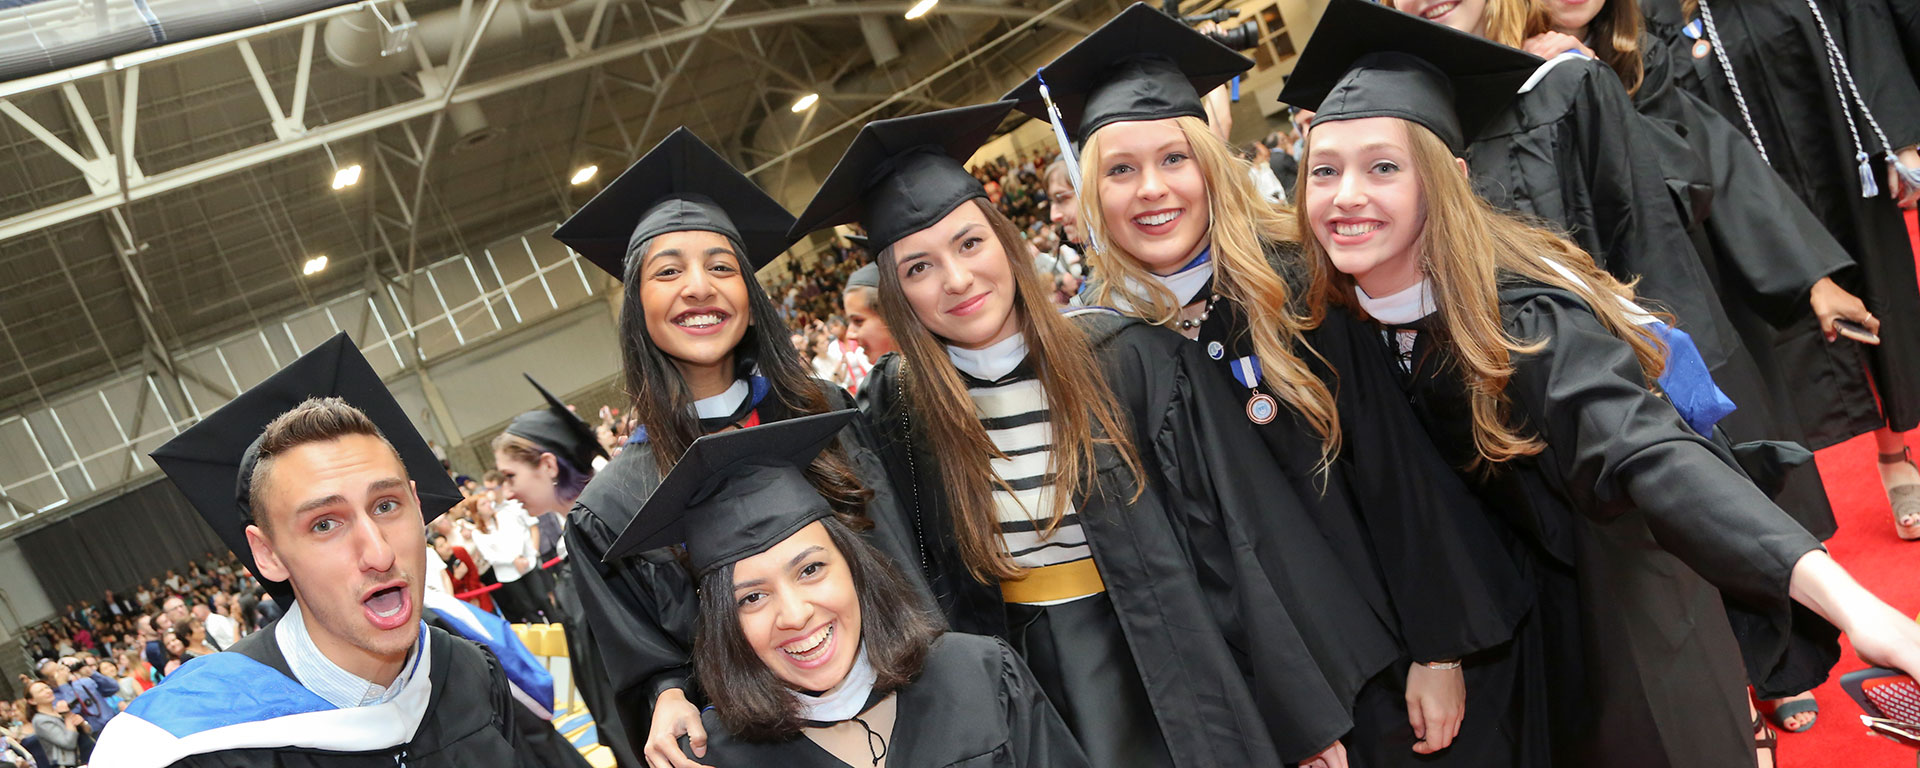 Students standing and smiling, wearing caps and gowns